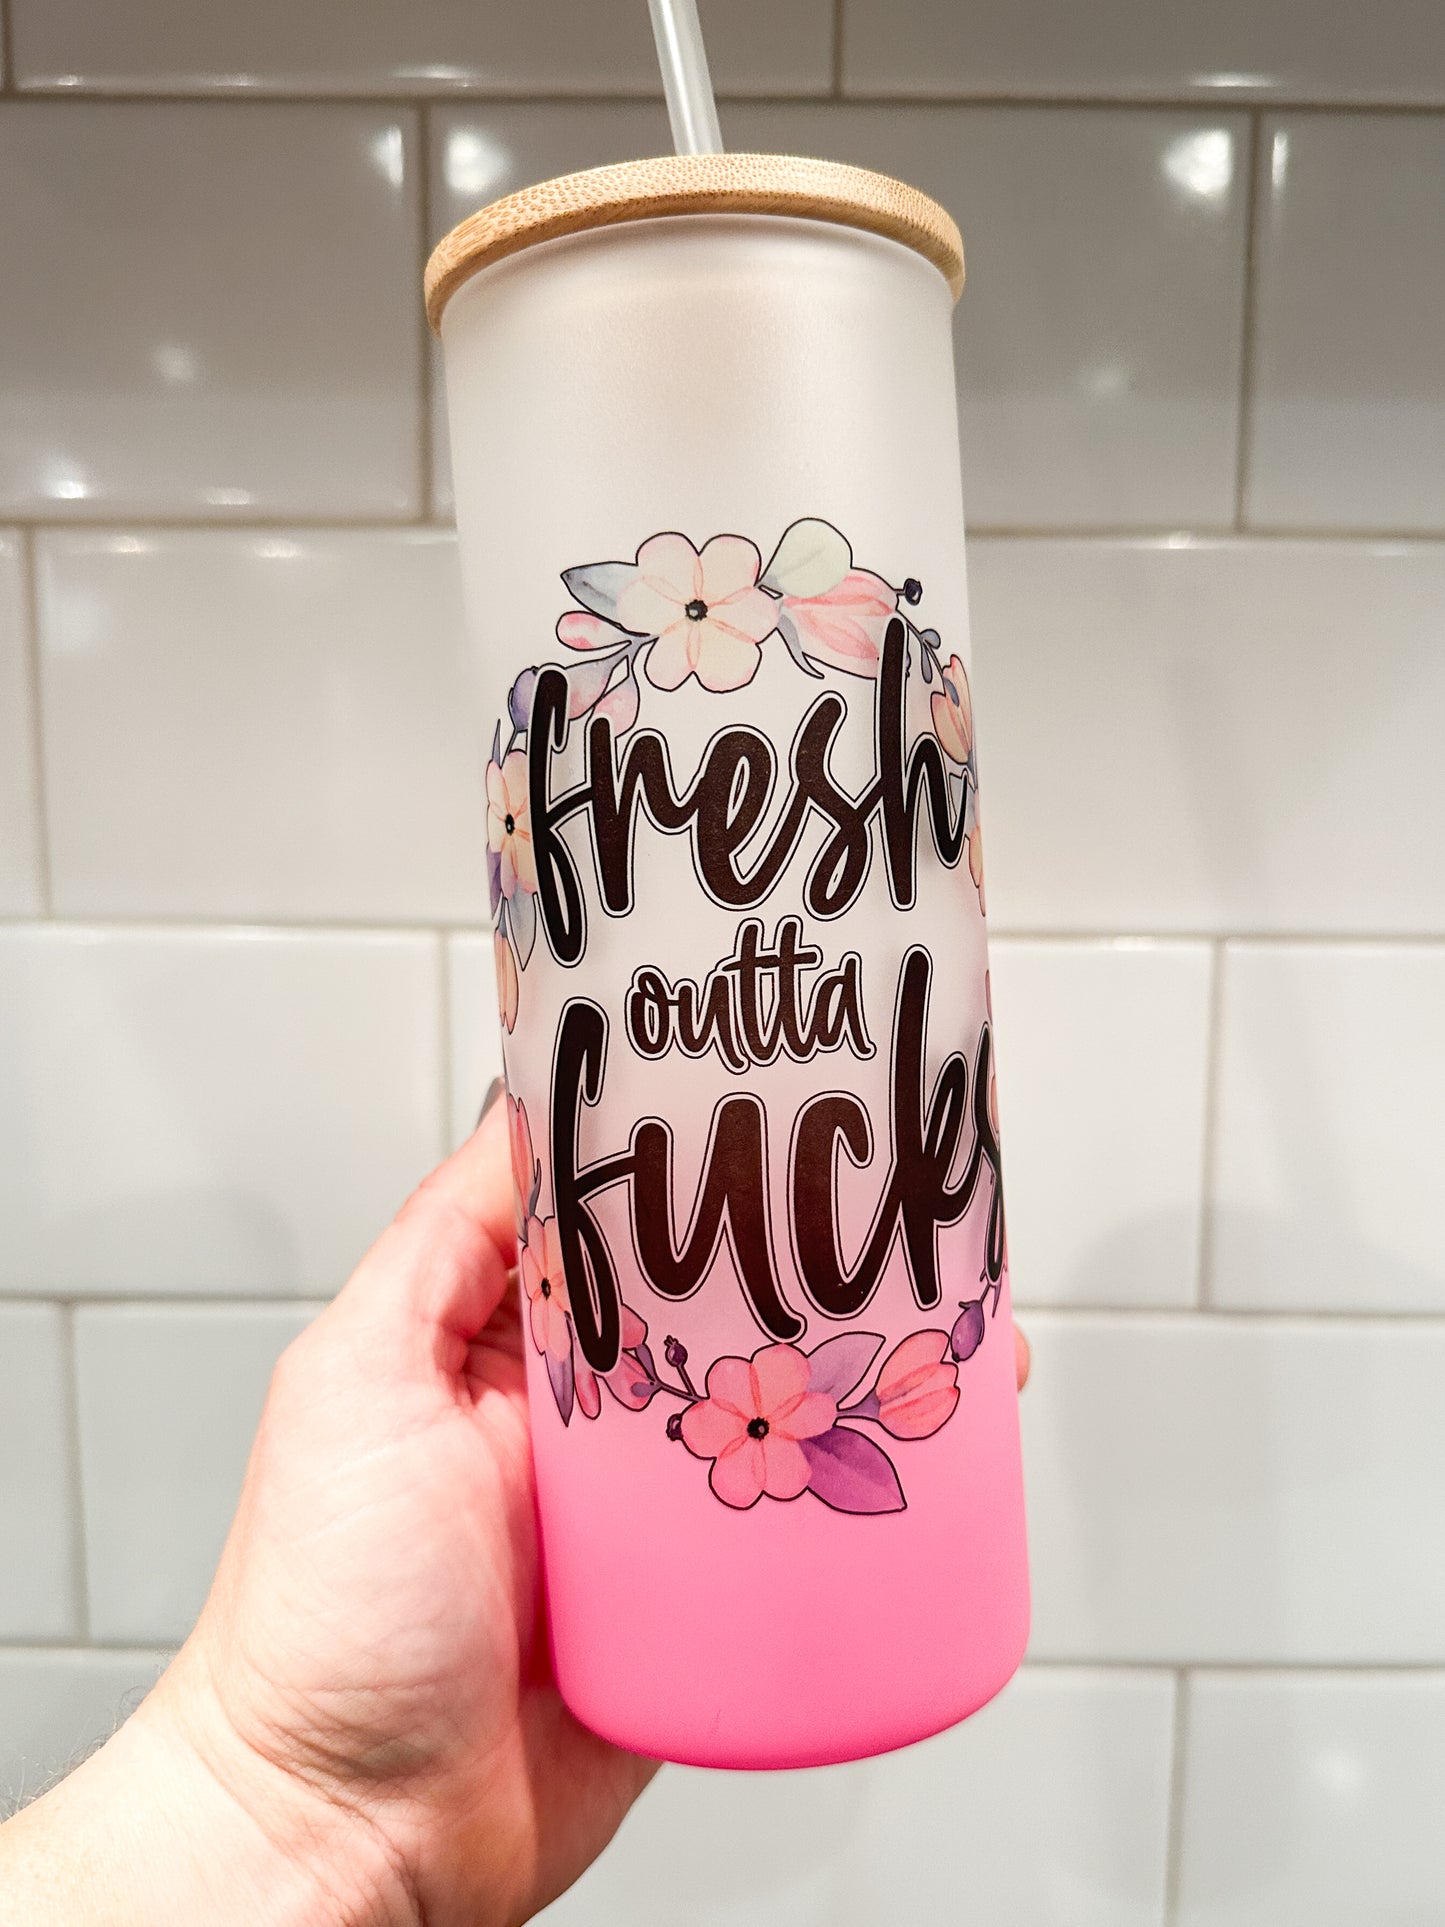 Fresh Out of F@cks | 25 oz Glass Tumbler with Bamboo Lid | Frosted Pink Glass | Iced Coffee Lover